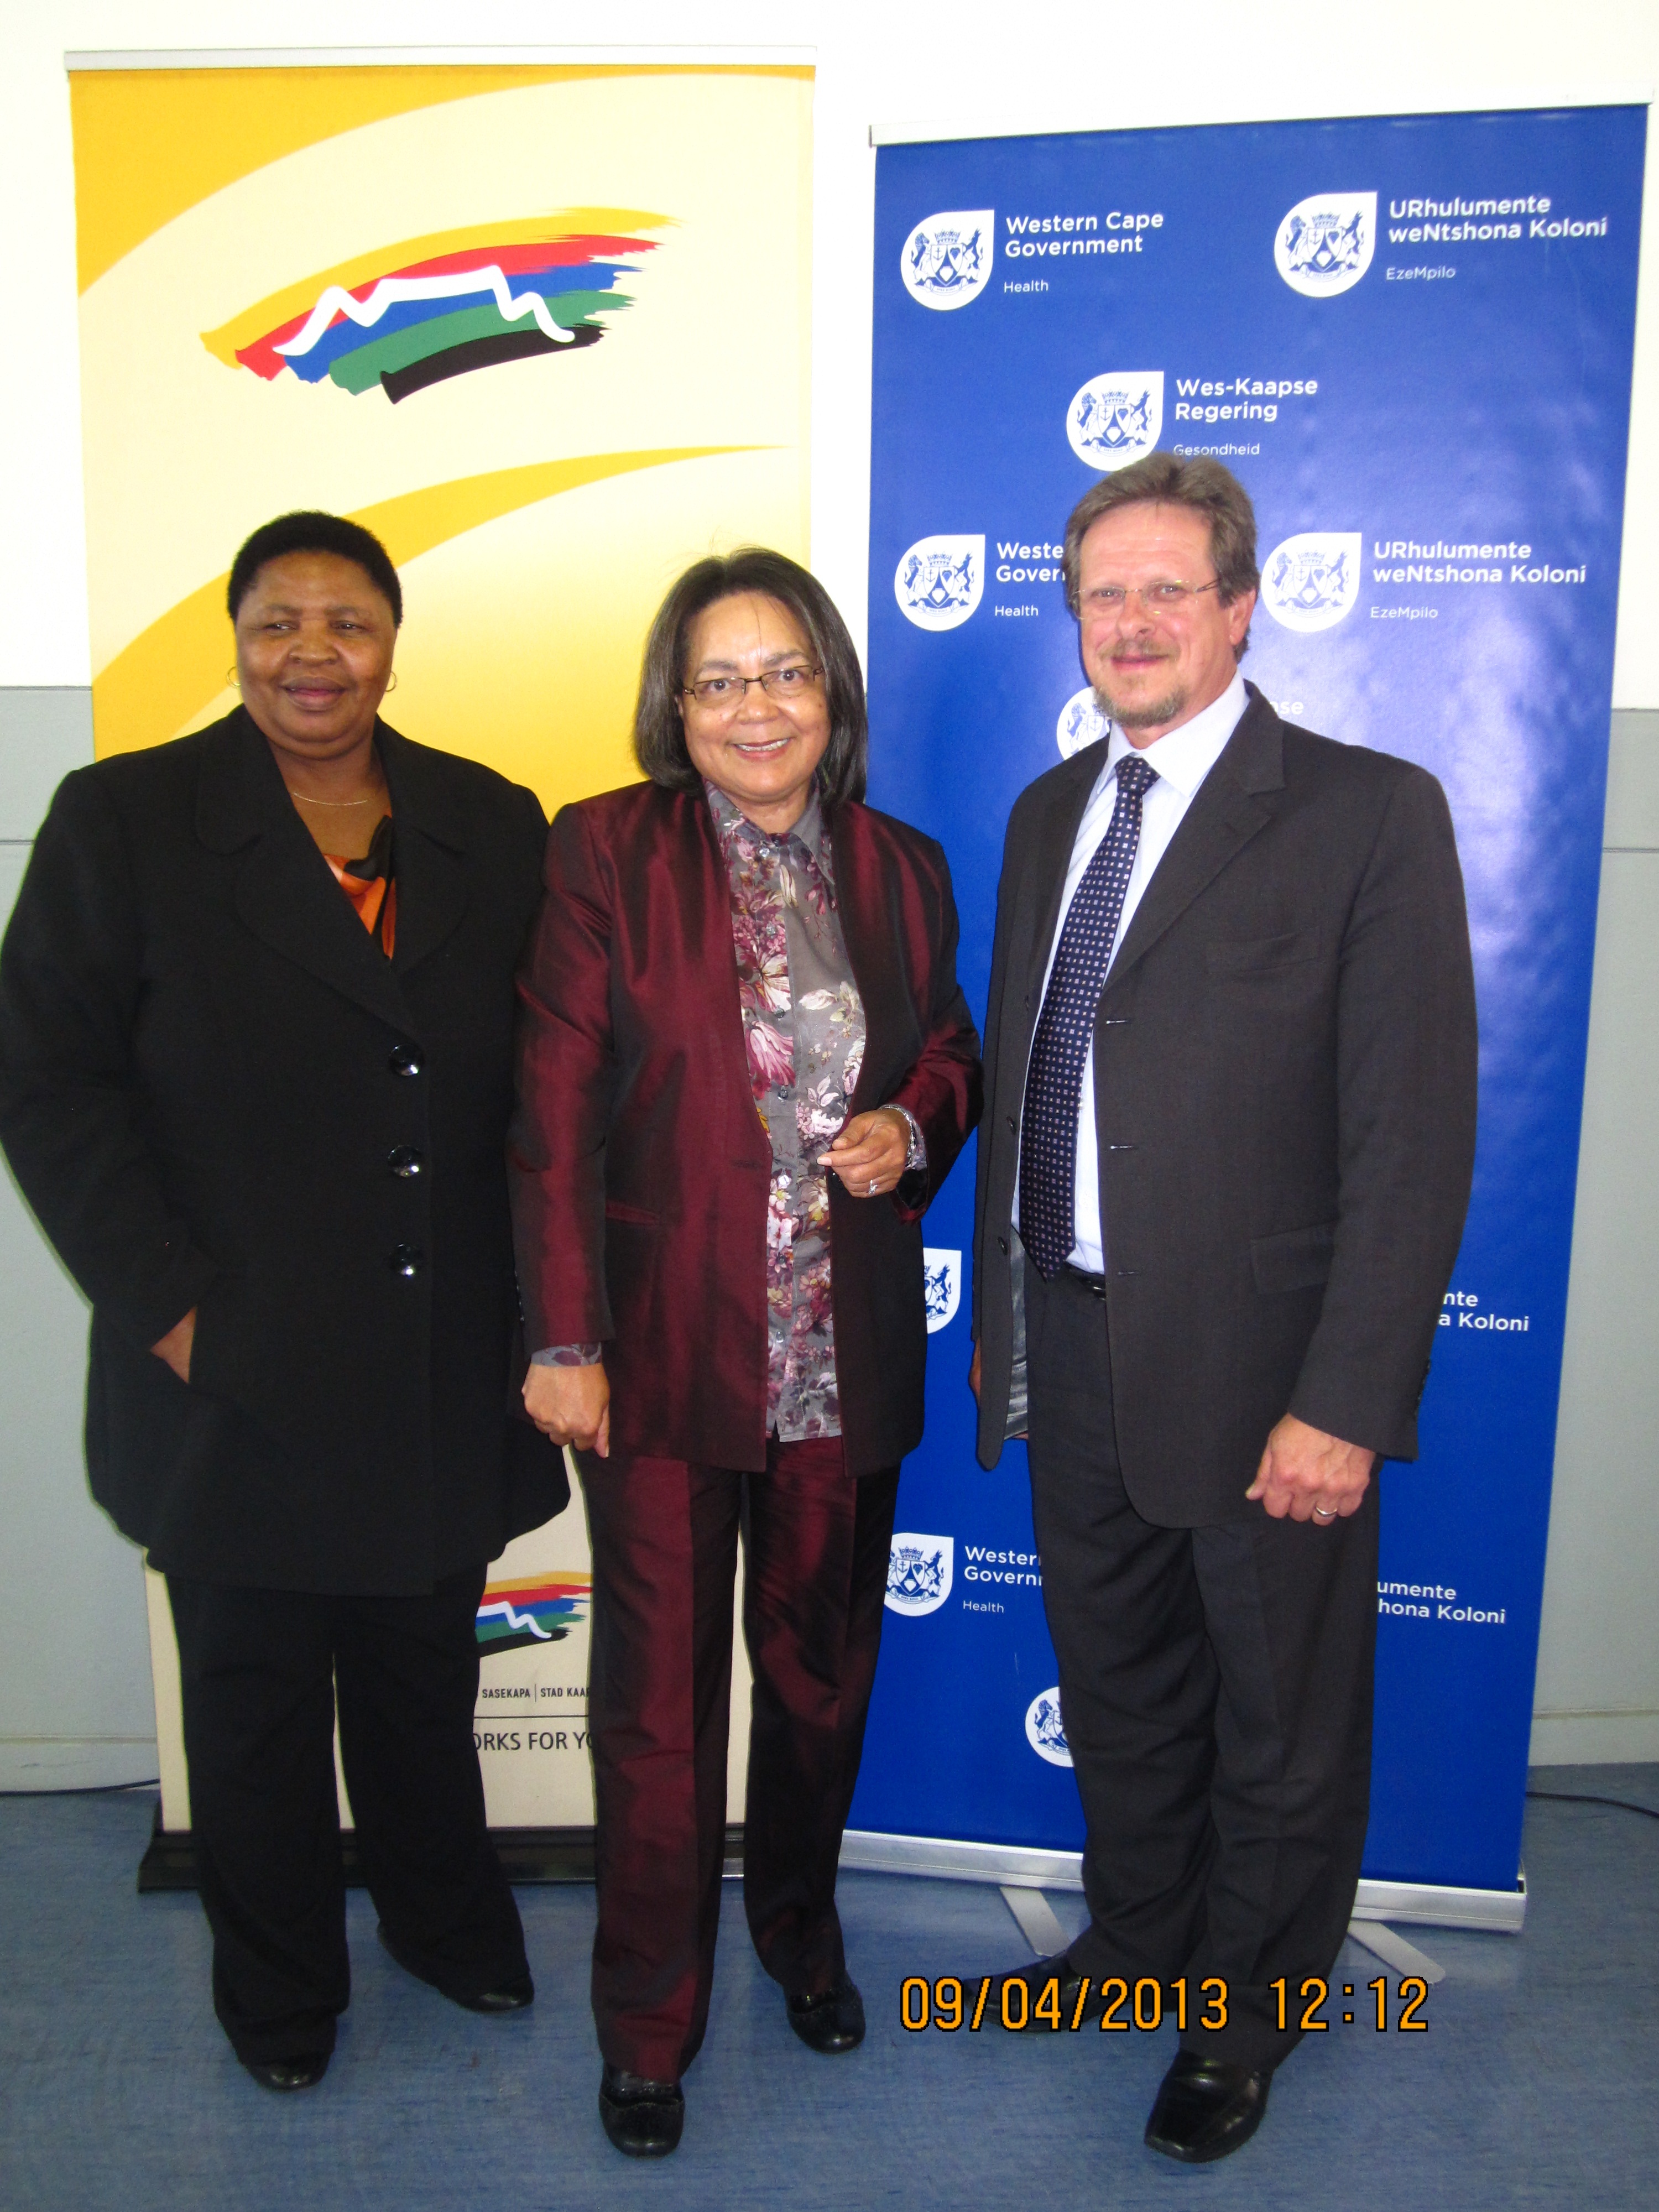 From left: Lungiswa James, City of Cape Town Mayoral Committee Member; Patricia de Lille, Mayor of Cape Town; and Theuns Botha, Western Cape Minister of Health.